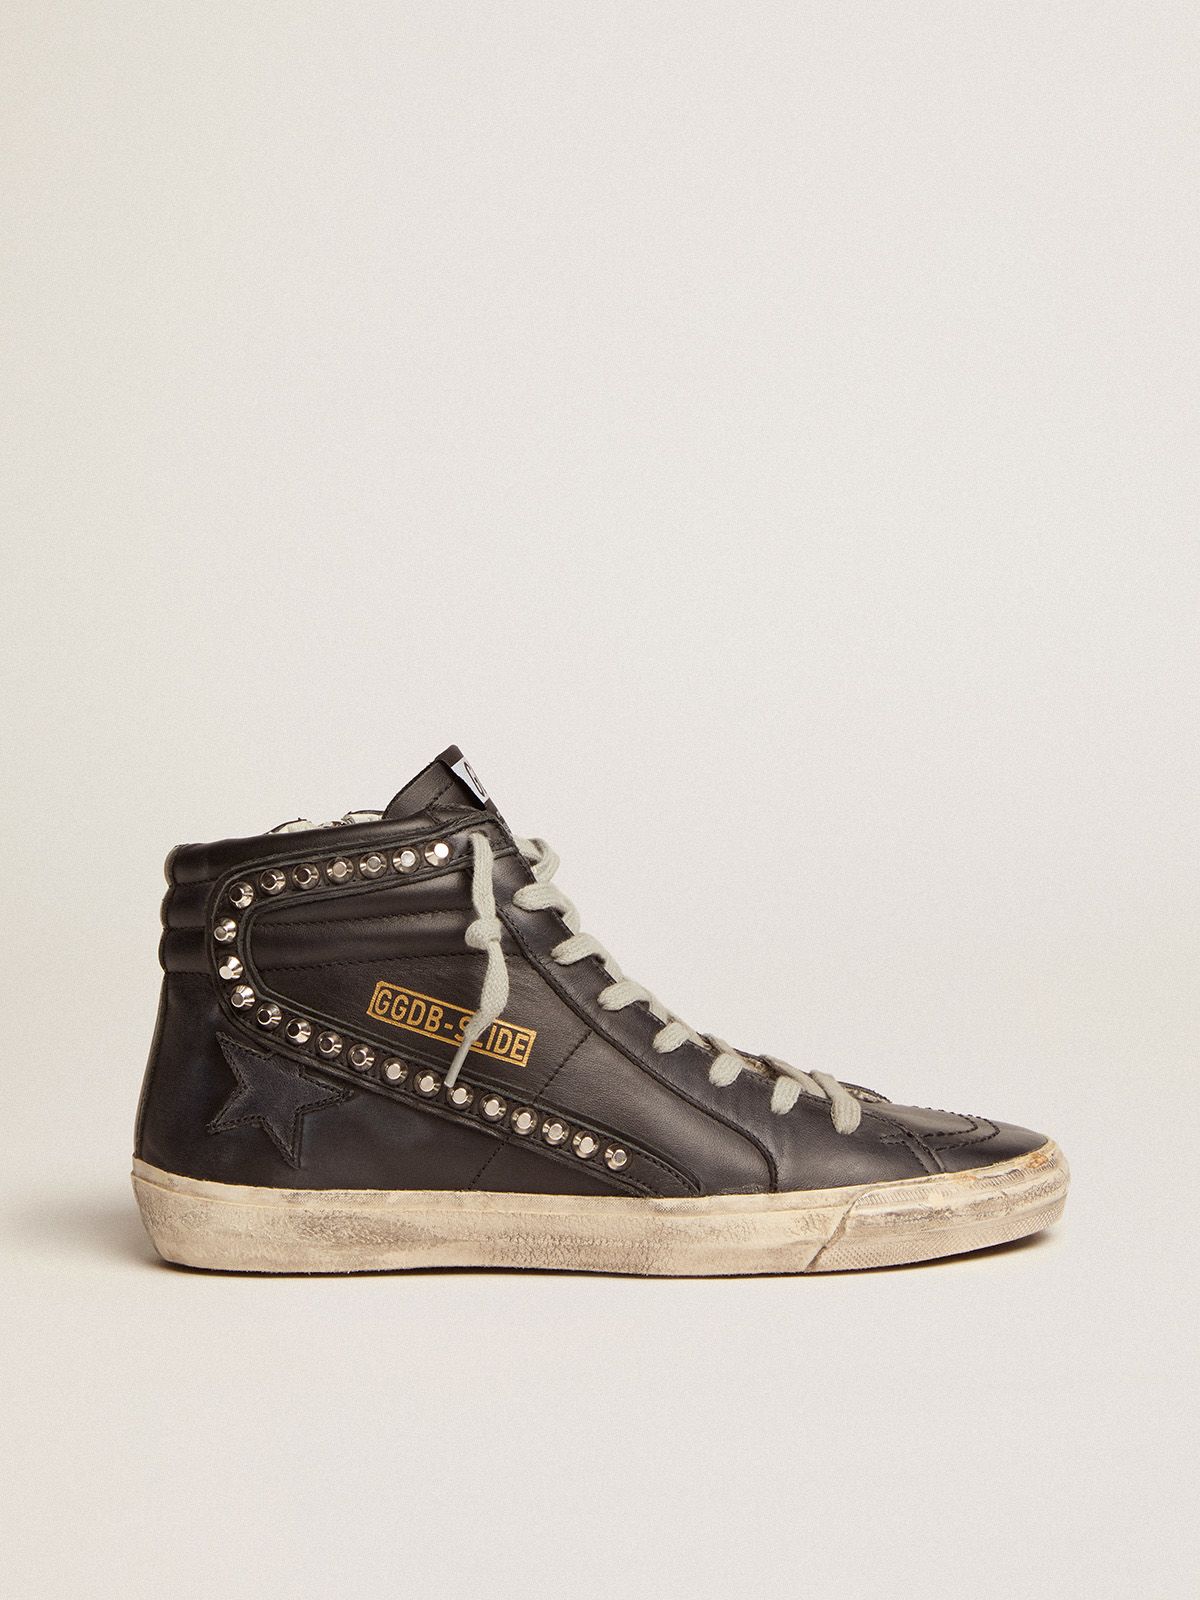 golden goose metal sneakers leather Slide studded in